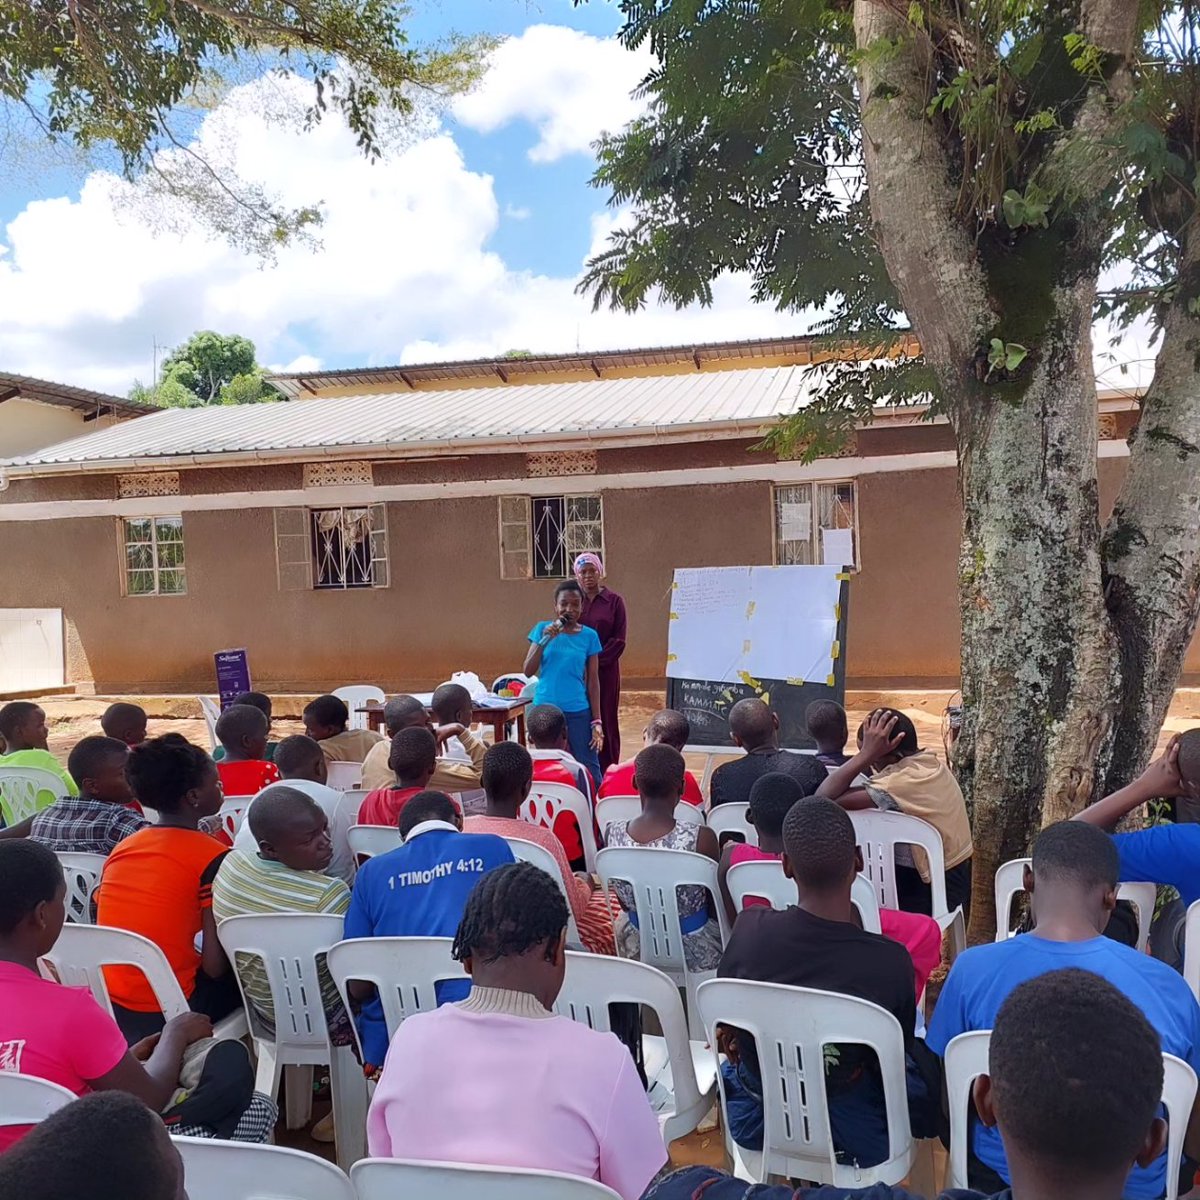 Still buzzing from our amazing SRHR session with youth at Kayunga Child Development Centre!
'Empowering young minds with knowledge today for a healthier tomorrow.' 🌟💡

#EachOneTeachOne 👫✨